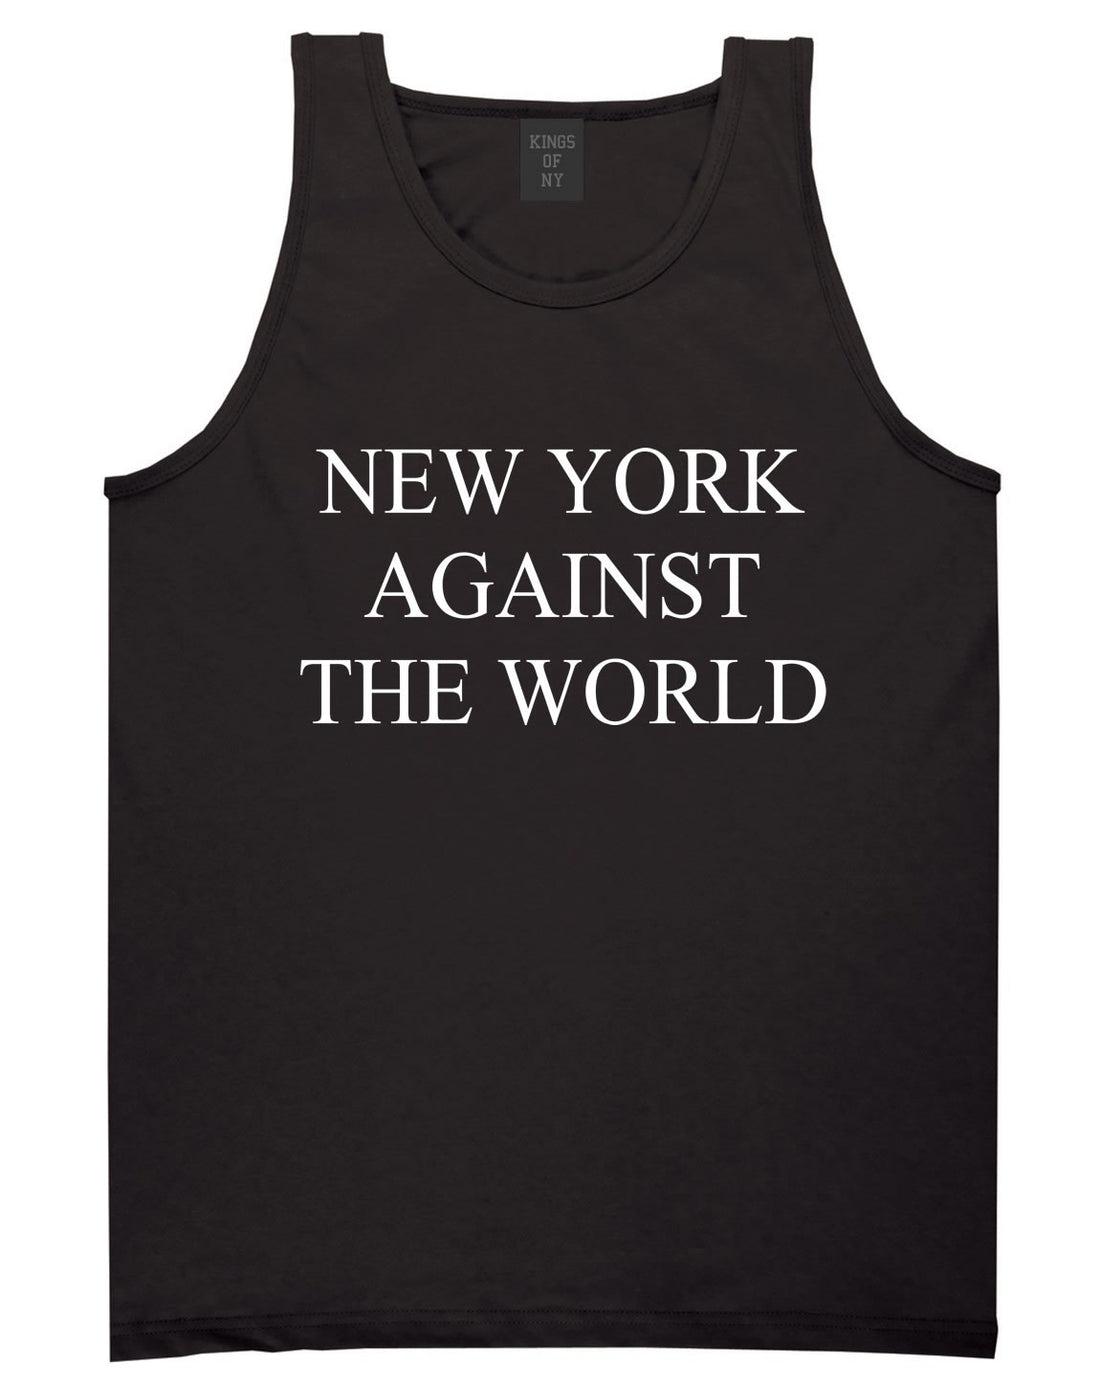 New York Against The World Tank Top in Black by Kings Of NY